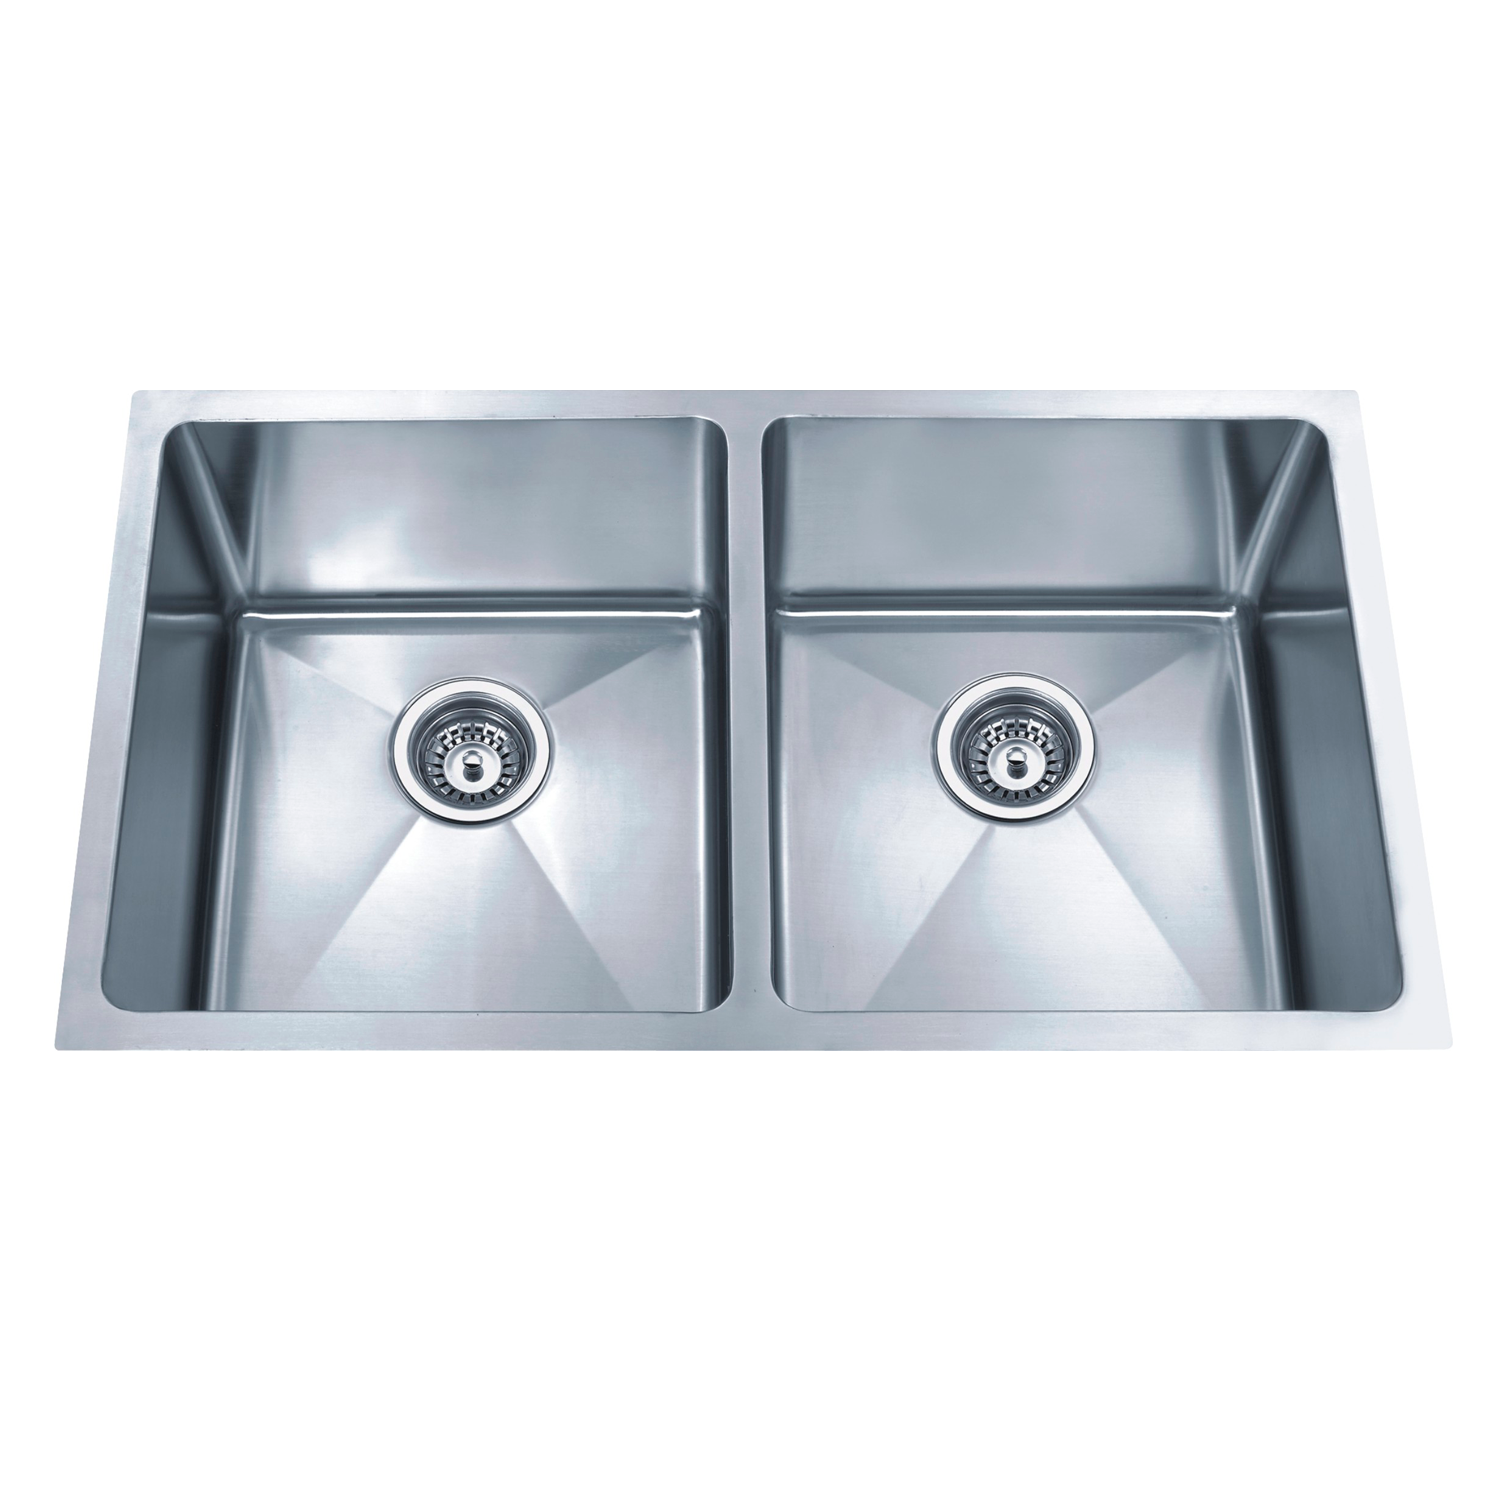 DAX Double Bowl Undermount Kitchen Sink, 18 Gauge Stainless Steel, Brushed Finish , 32 x 19 x 9 Inches (DAX-3118B-X)